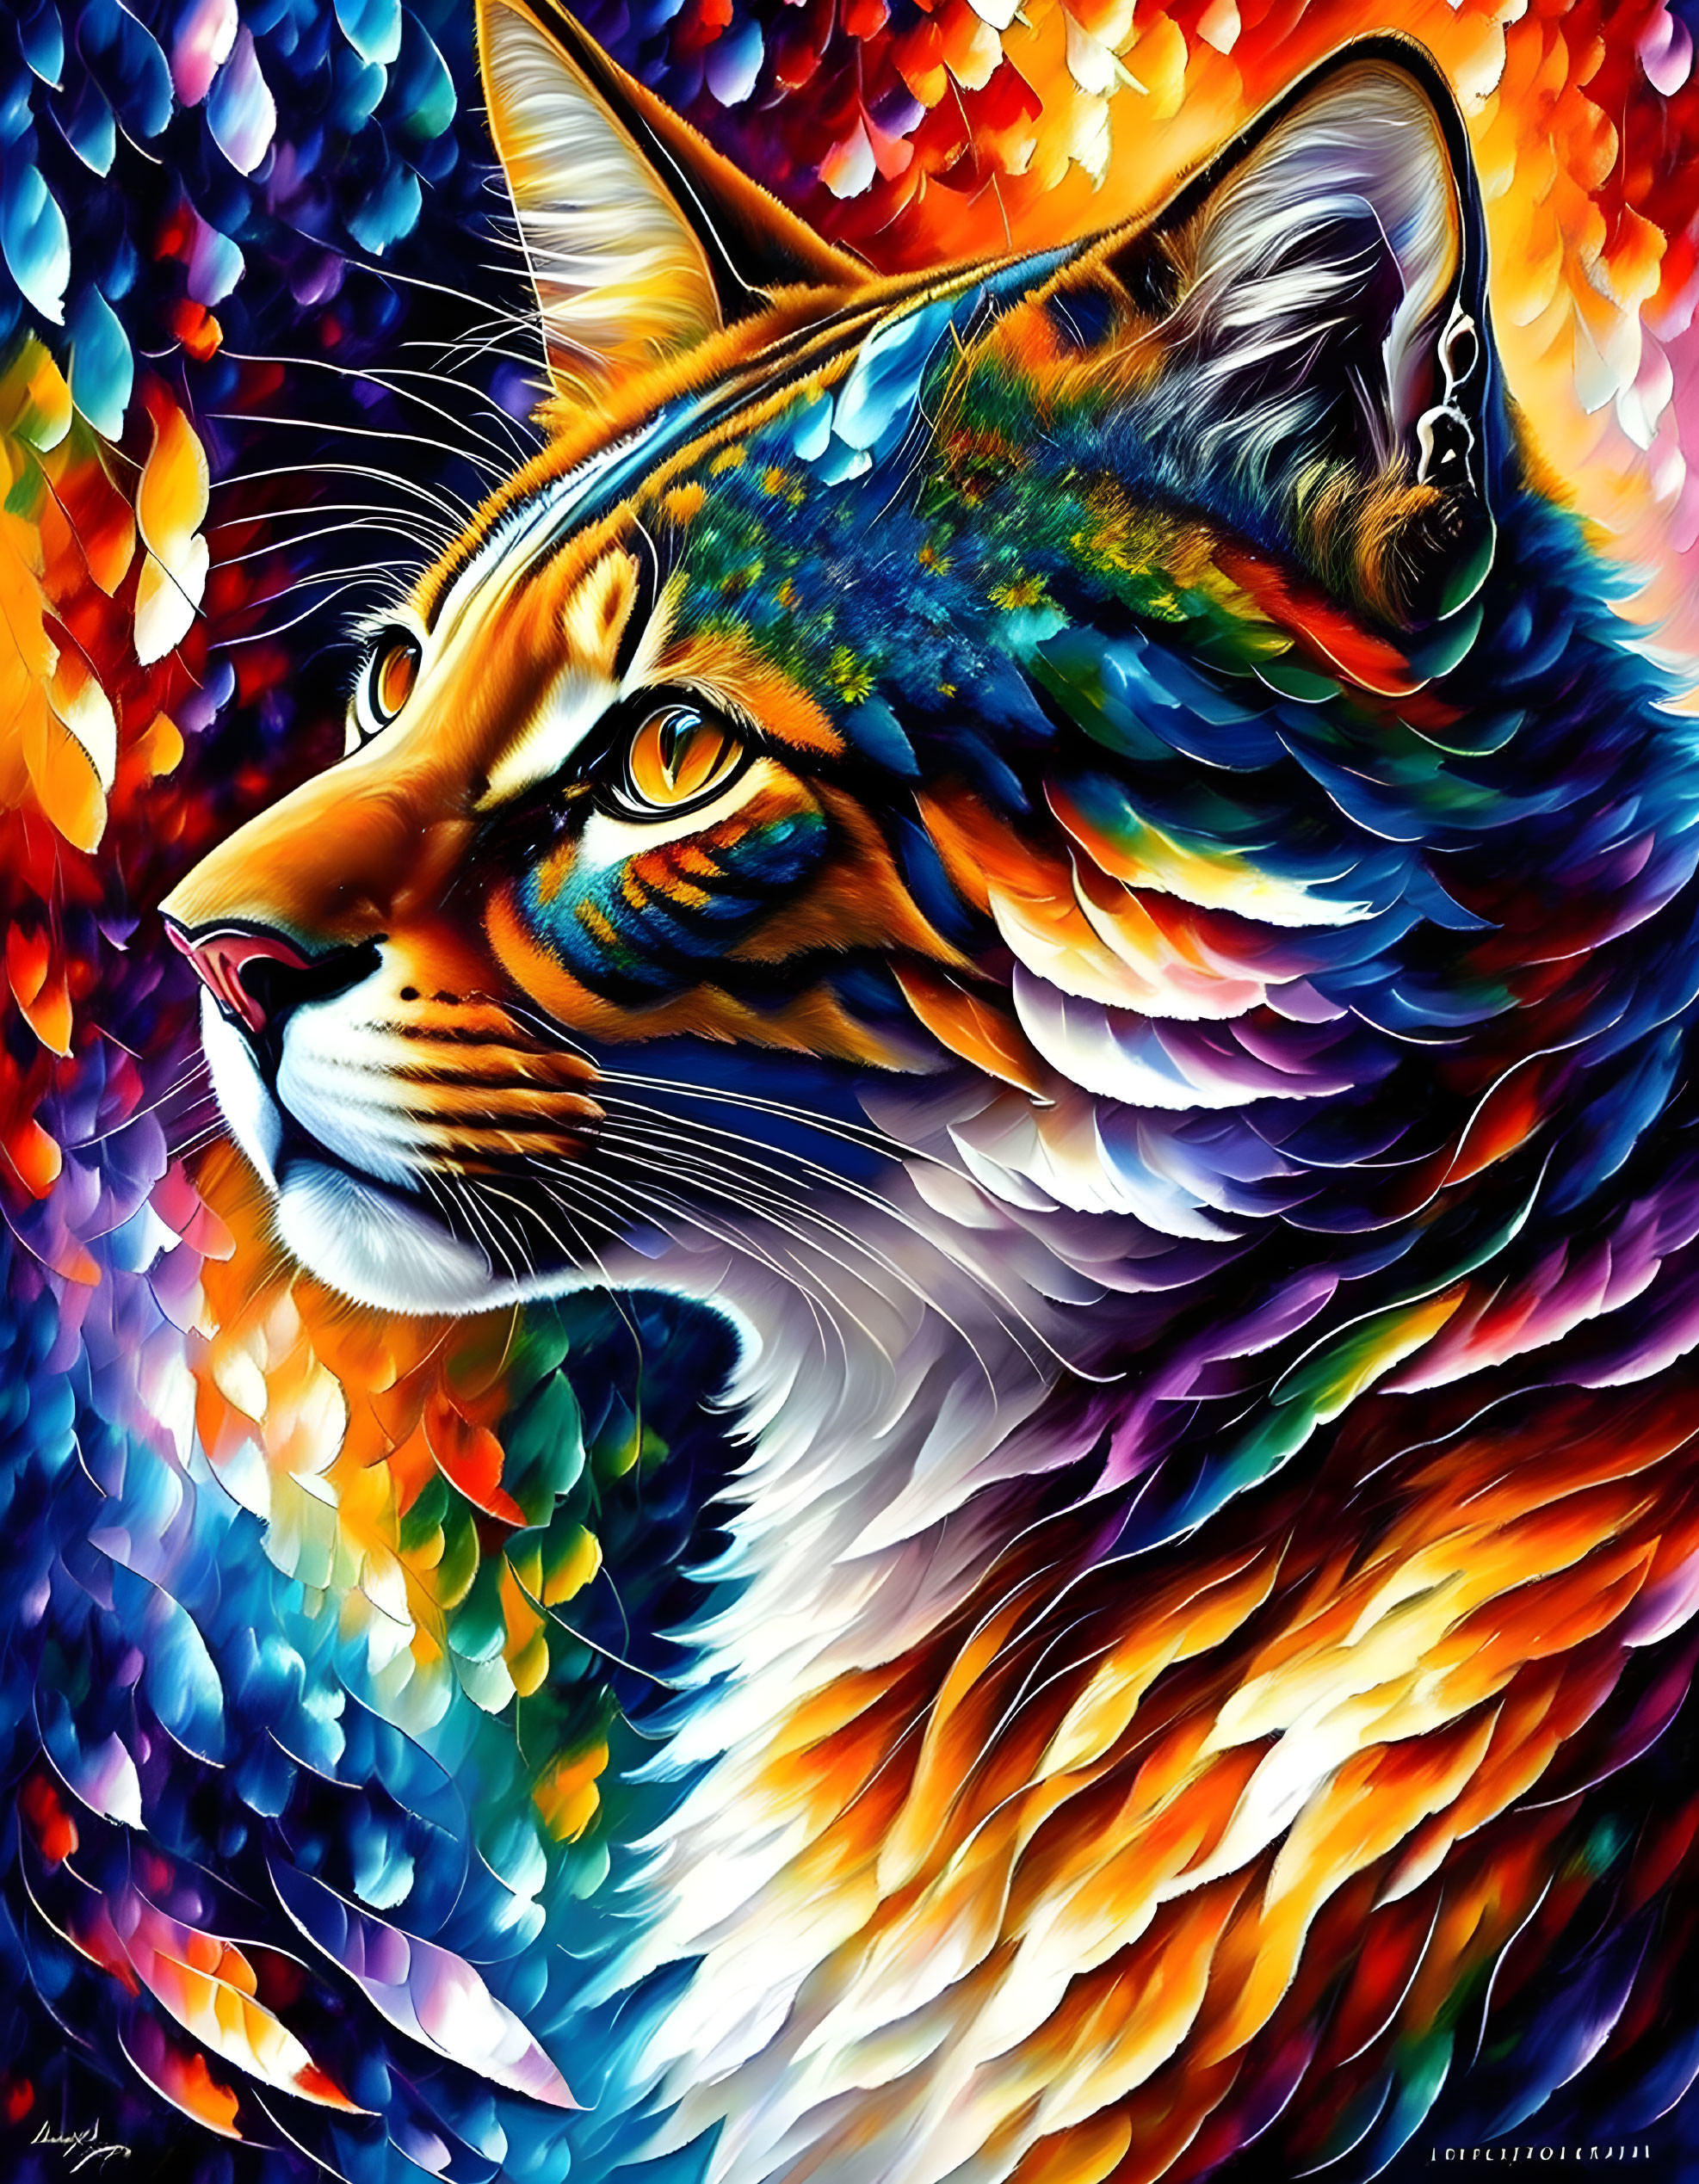 Colorful Cat Portrait with Fiery Mosaic Fur in Abstract Style